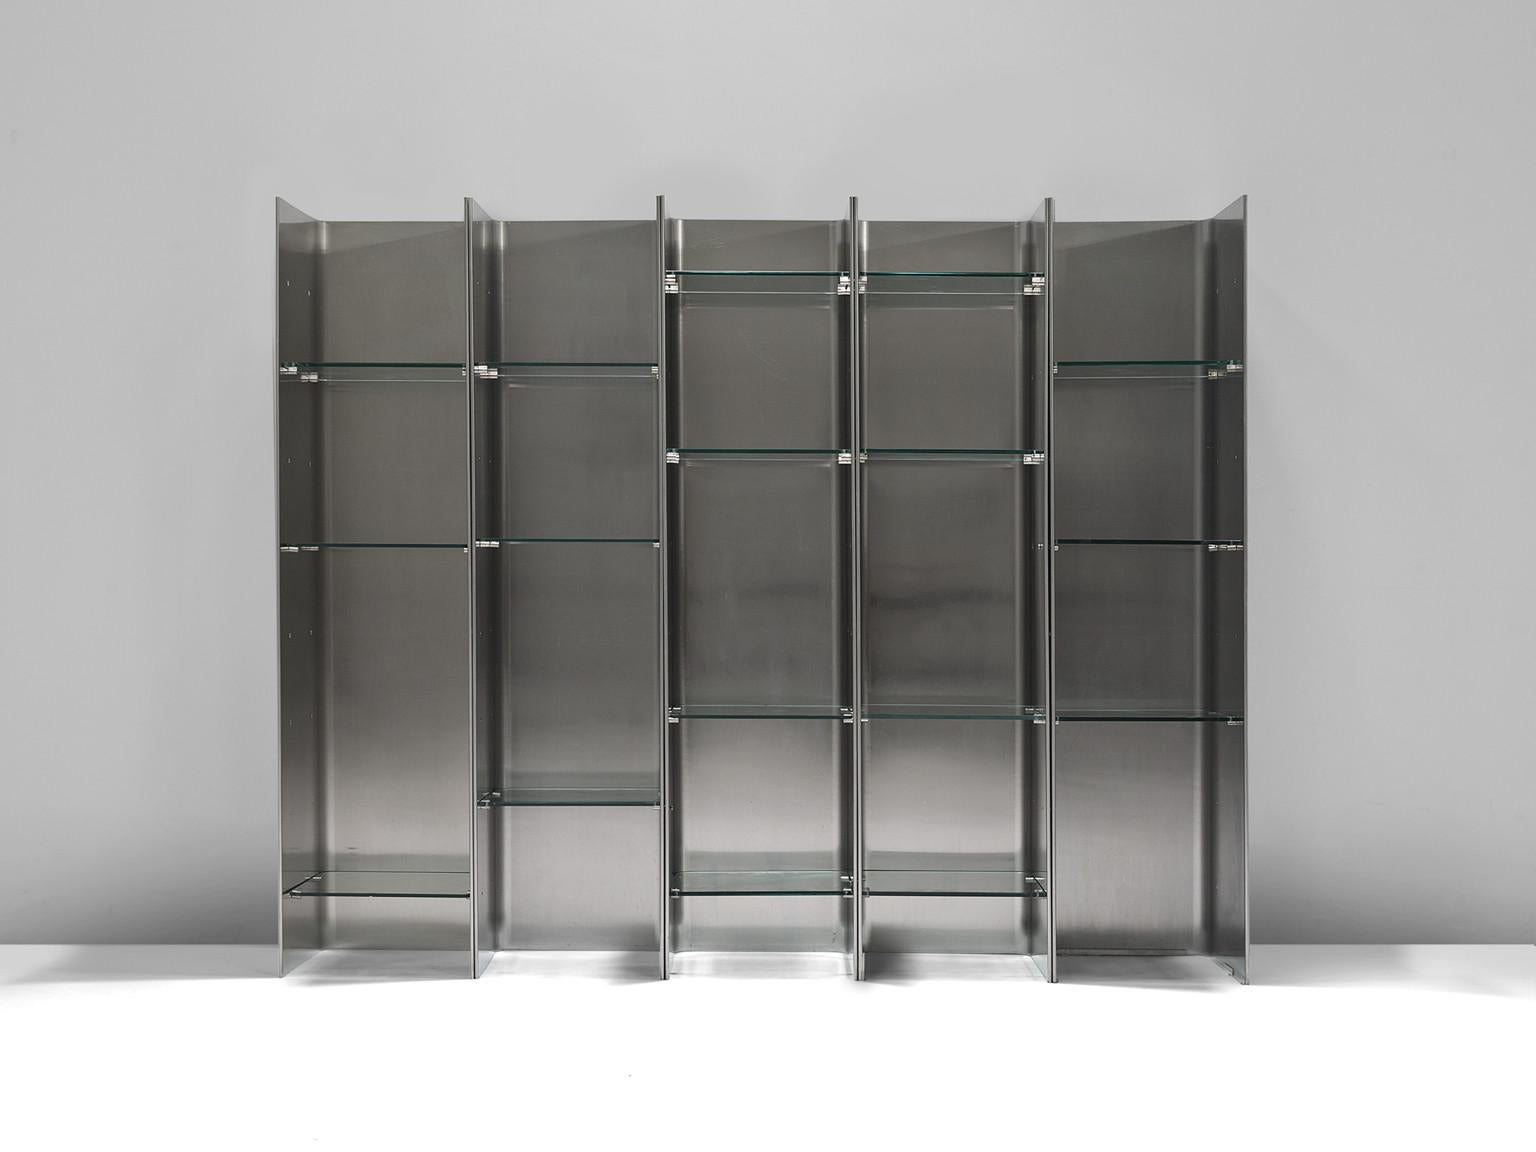 Bookcase by Carla Venosta & Guido Zimmerman for Arflex, Italy, 1970s

This steel bookcase with plexiglass shelves has a clean and geometric design which is emphasized by the rawness of the materials. This particular unit consists of five vertical